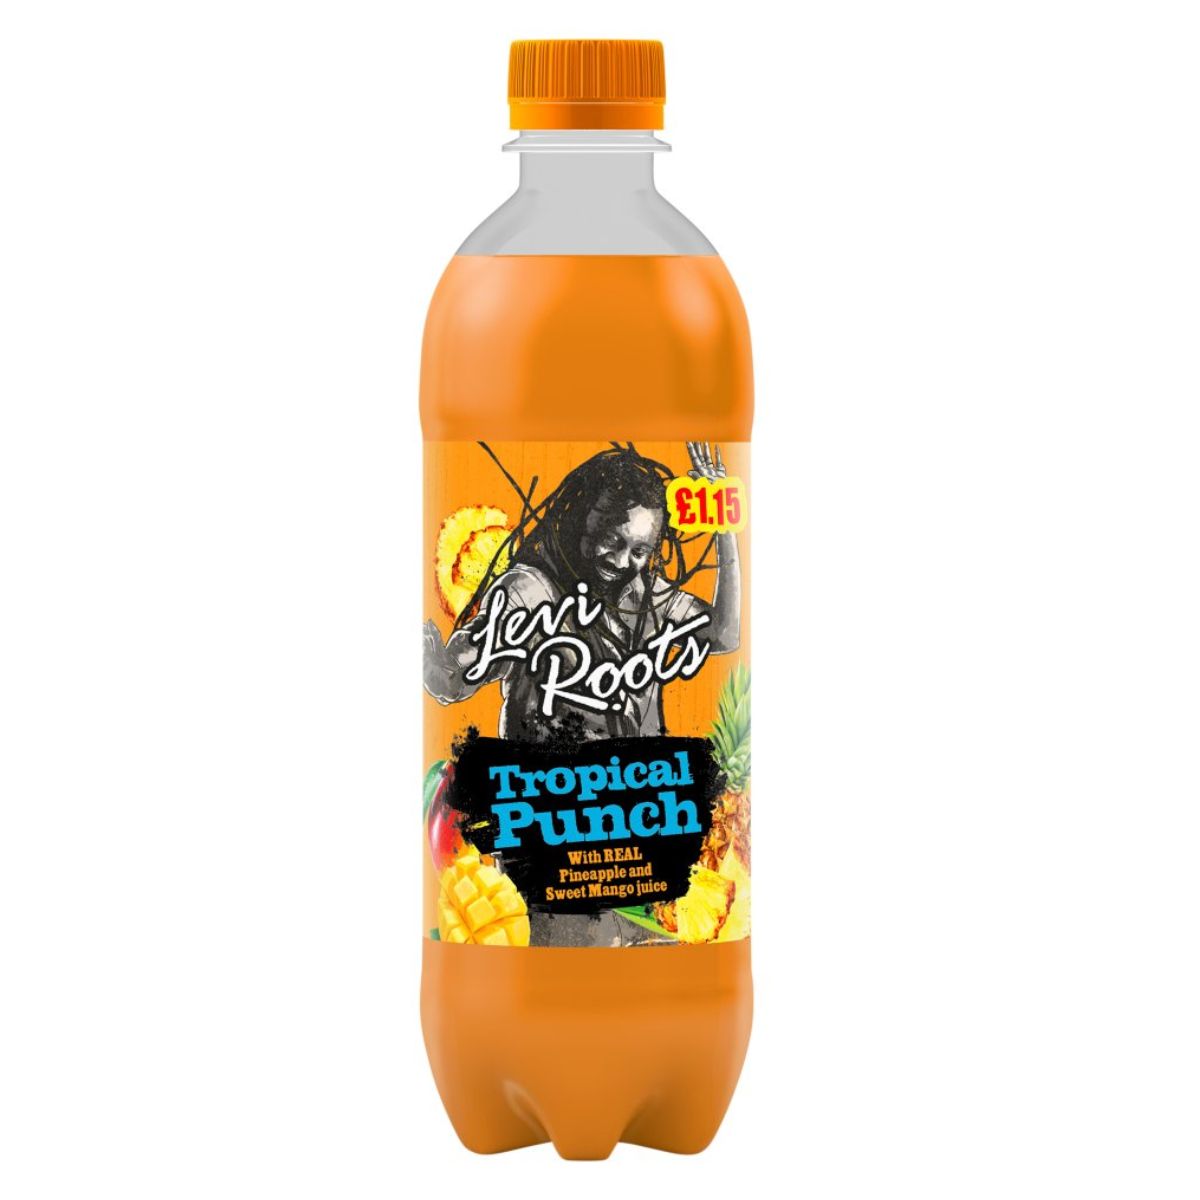 A bottle of Levi Roots - Tropical Punch - 500ml soft drink, priced at £1.15, featuring a vibrant label with fruits and Levi Roots' image.